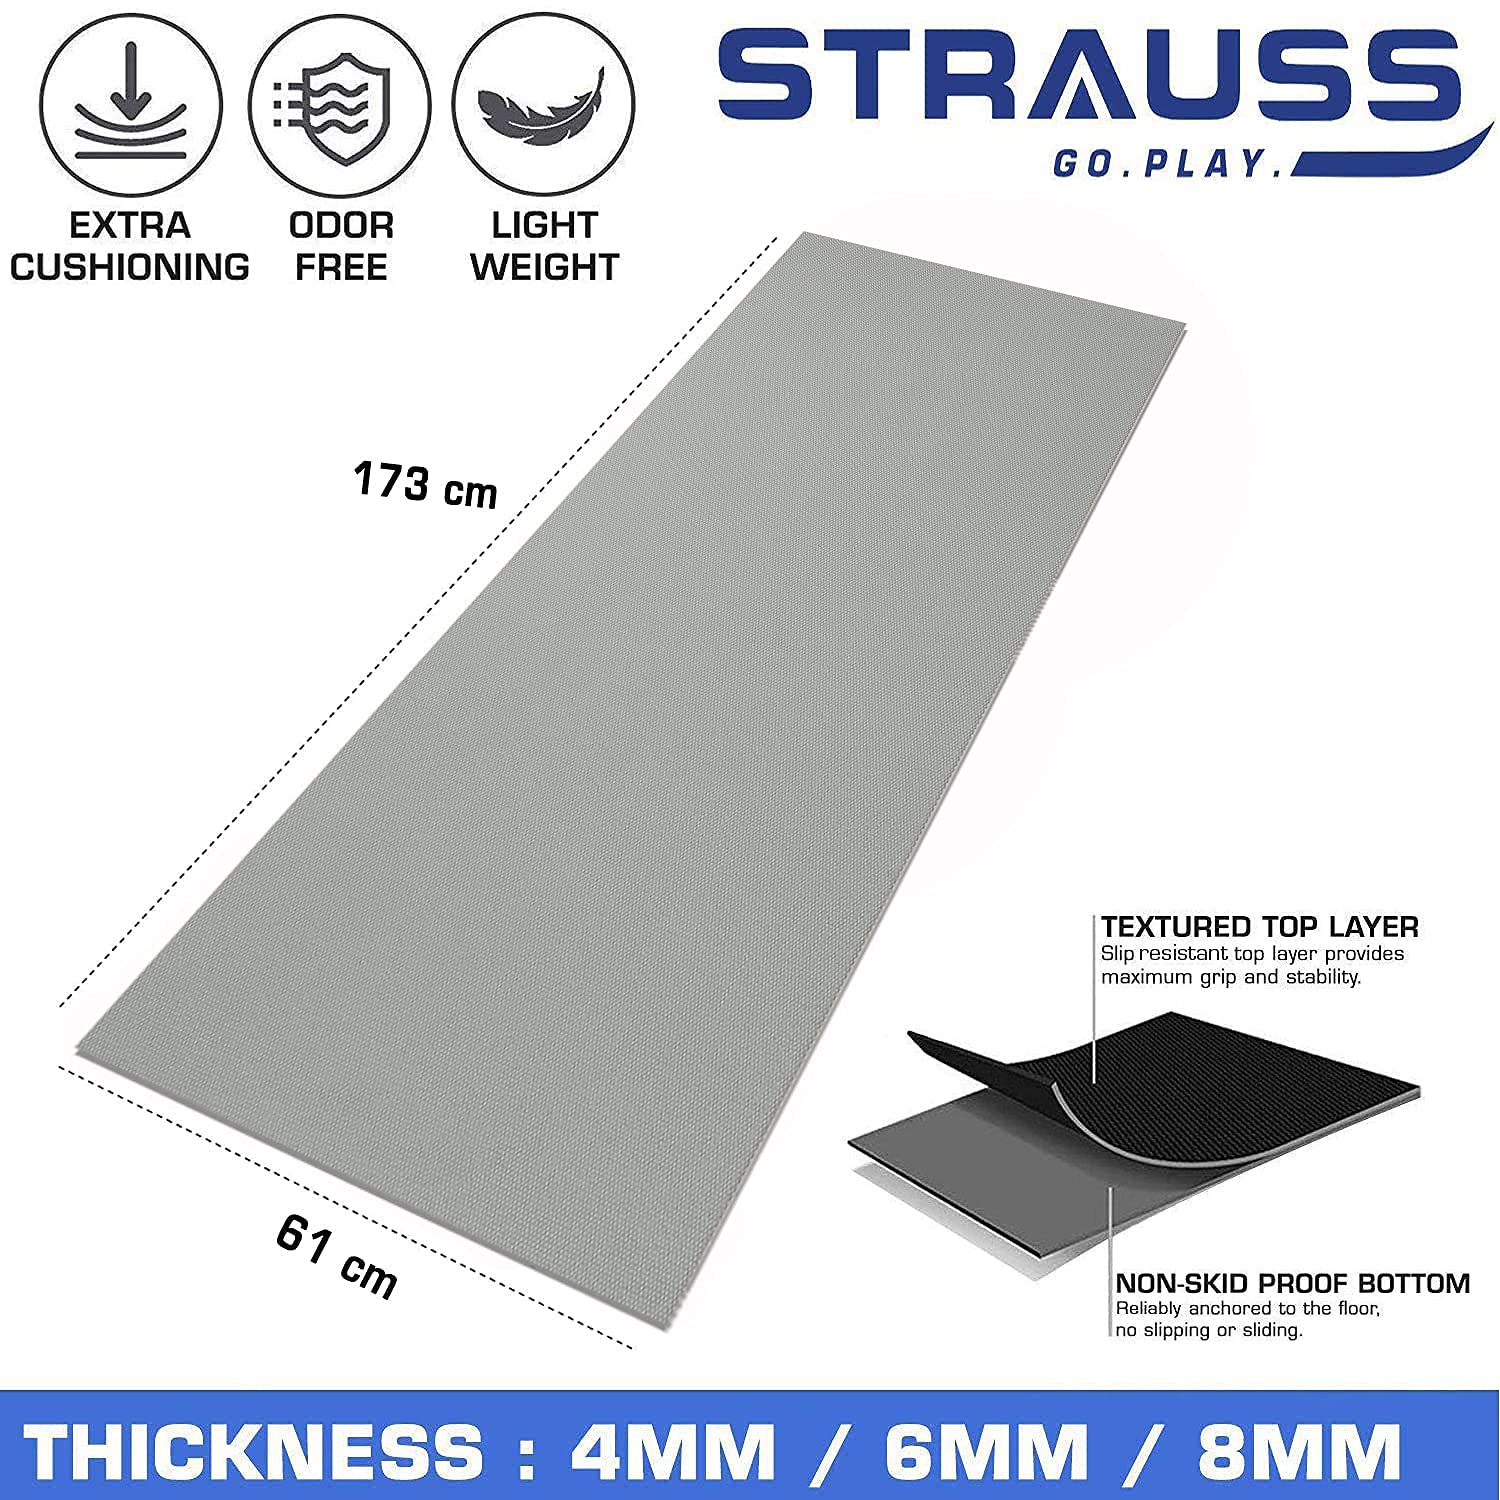 Strauss Yoga Mat 6mm Grey With Yoga Block And Belt